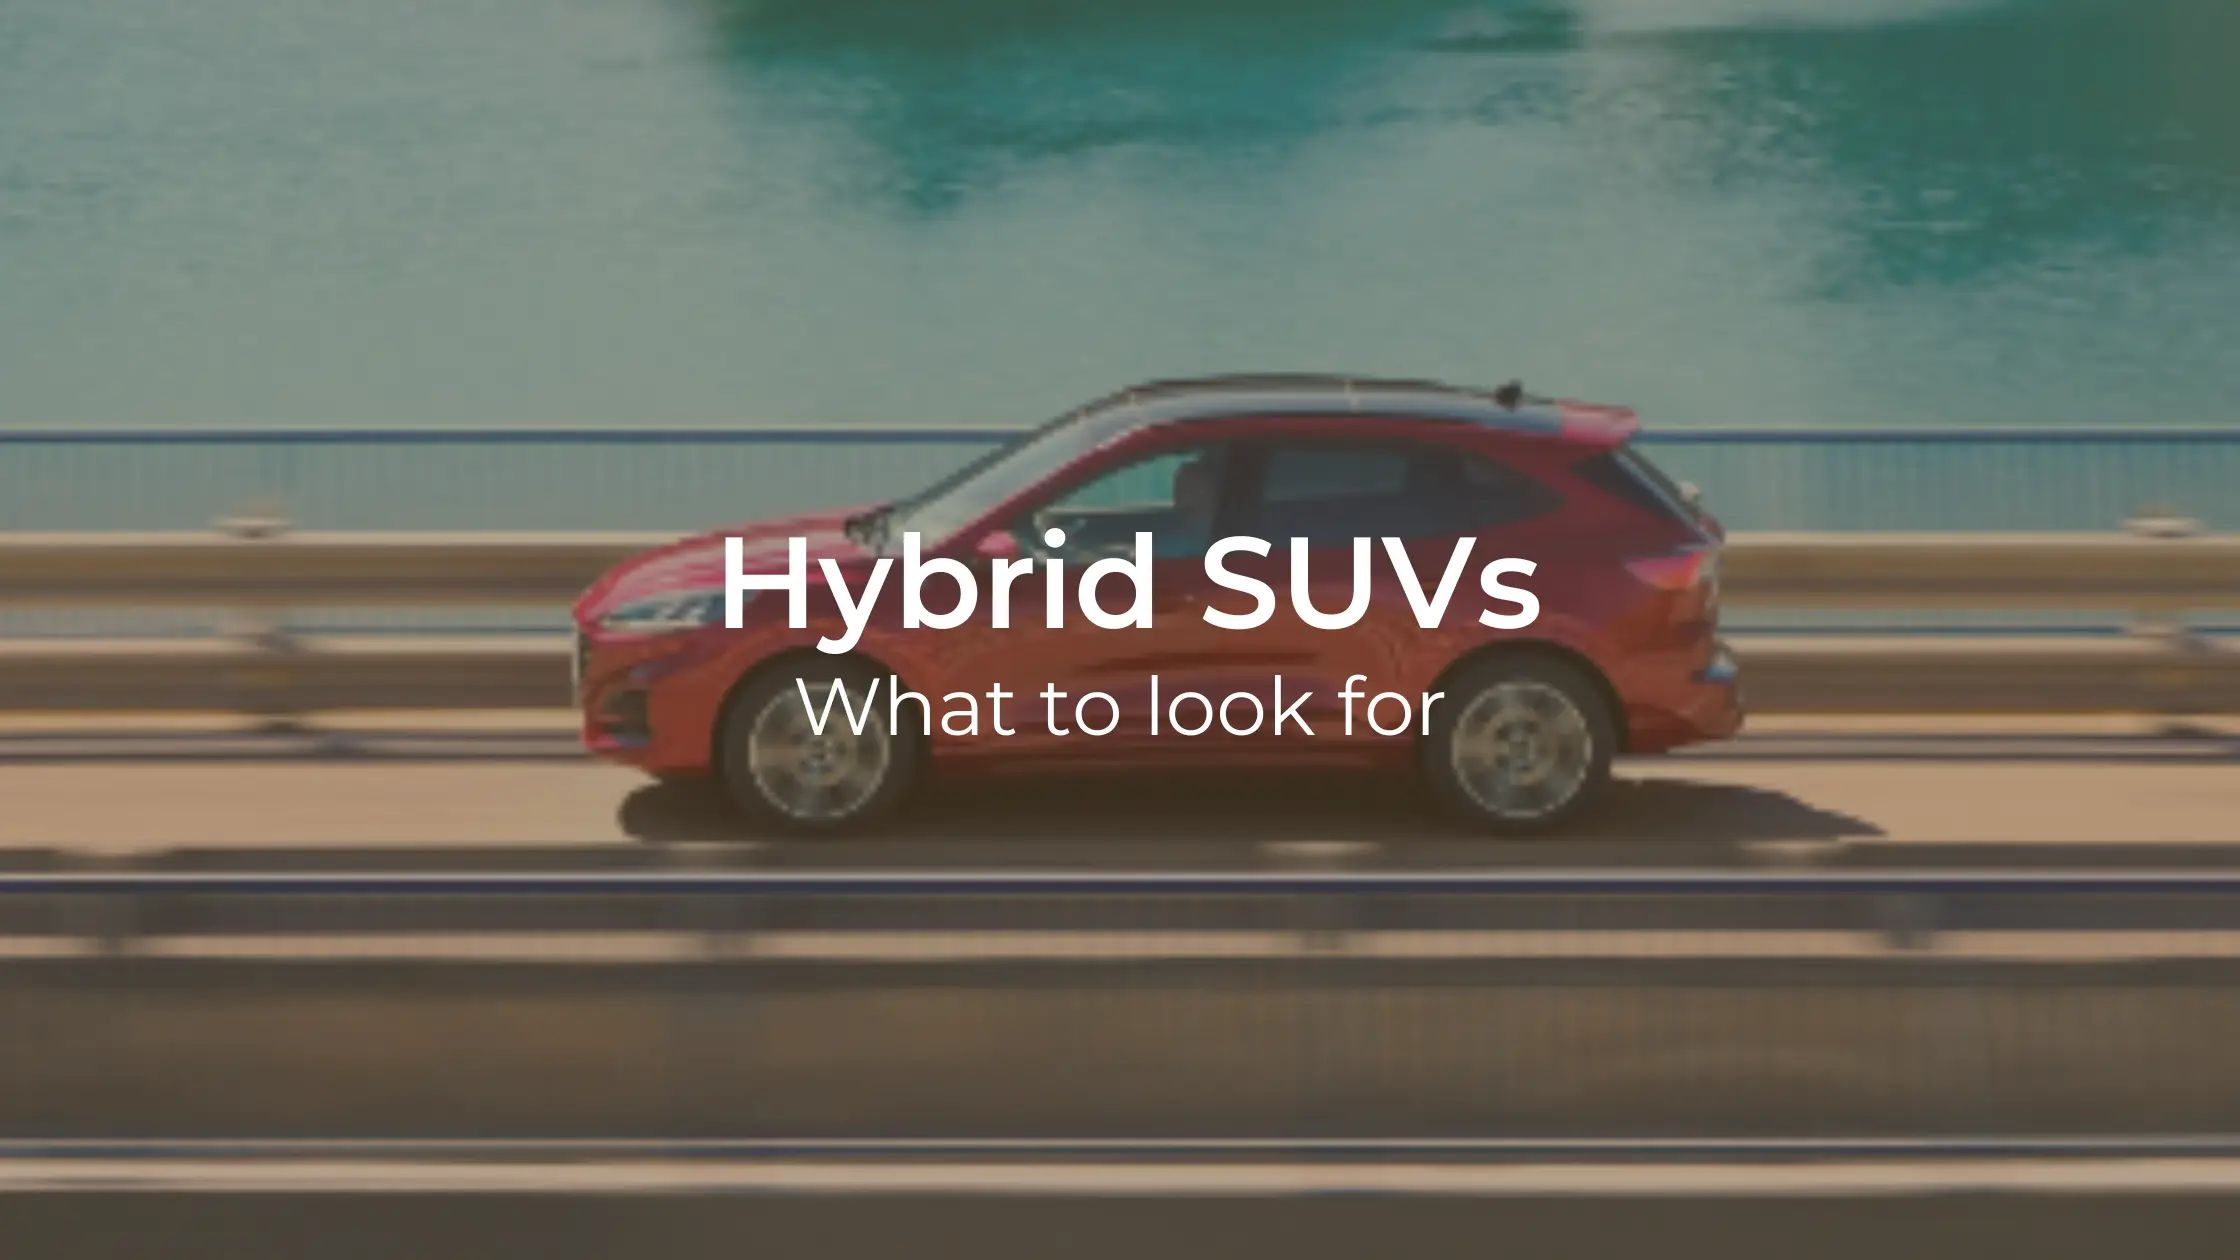 Hybrid SUVs - What to Look For